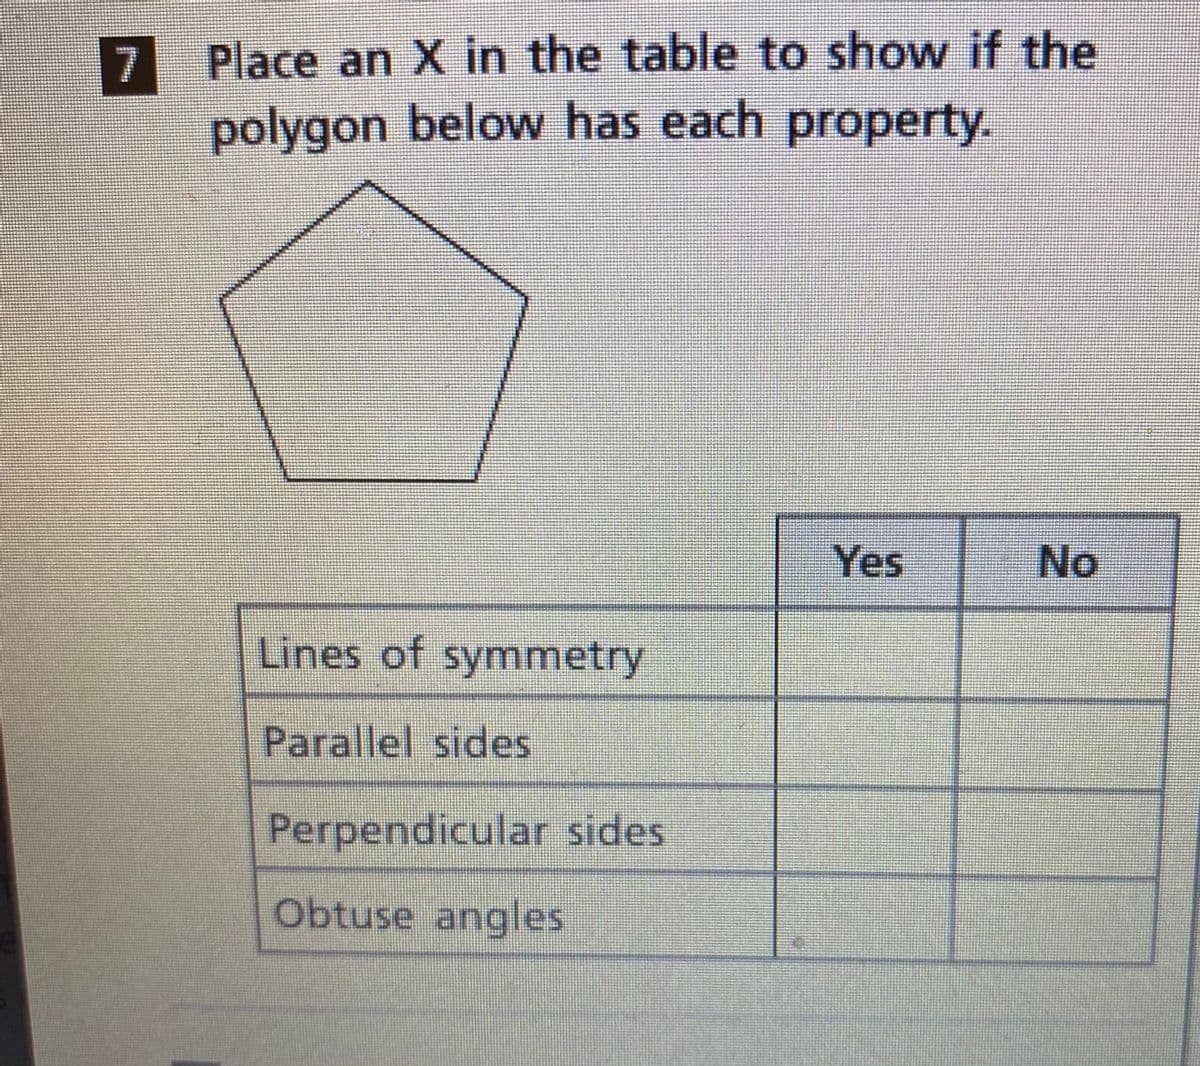 Place an X in the table to show if the
7
polygon below has each property.
Yes
No
Lines of symmetry
Parallel sides
Perpendicular sides
Obtuse angles
